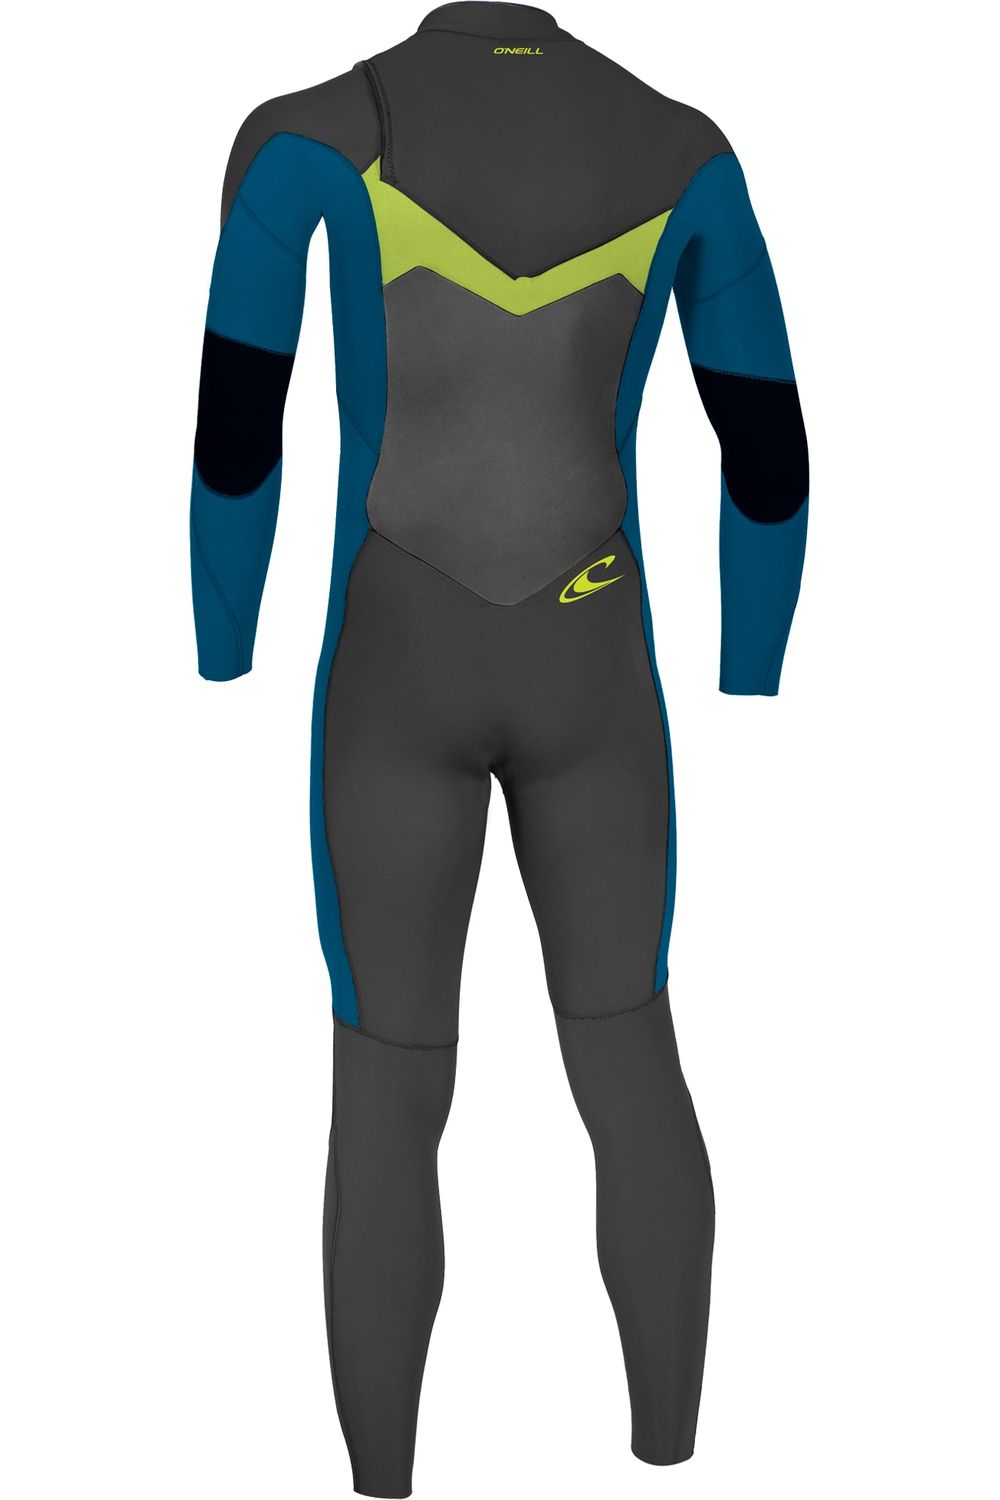 O'Neill Ninja Youth Wetsuit 4/3 Chest Zip Black Blue Dayglo